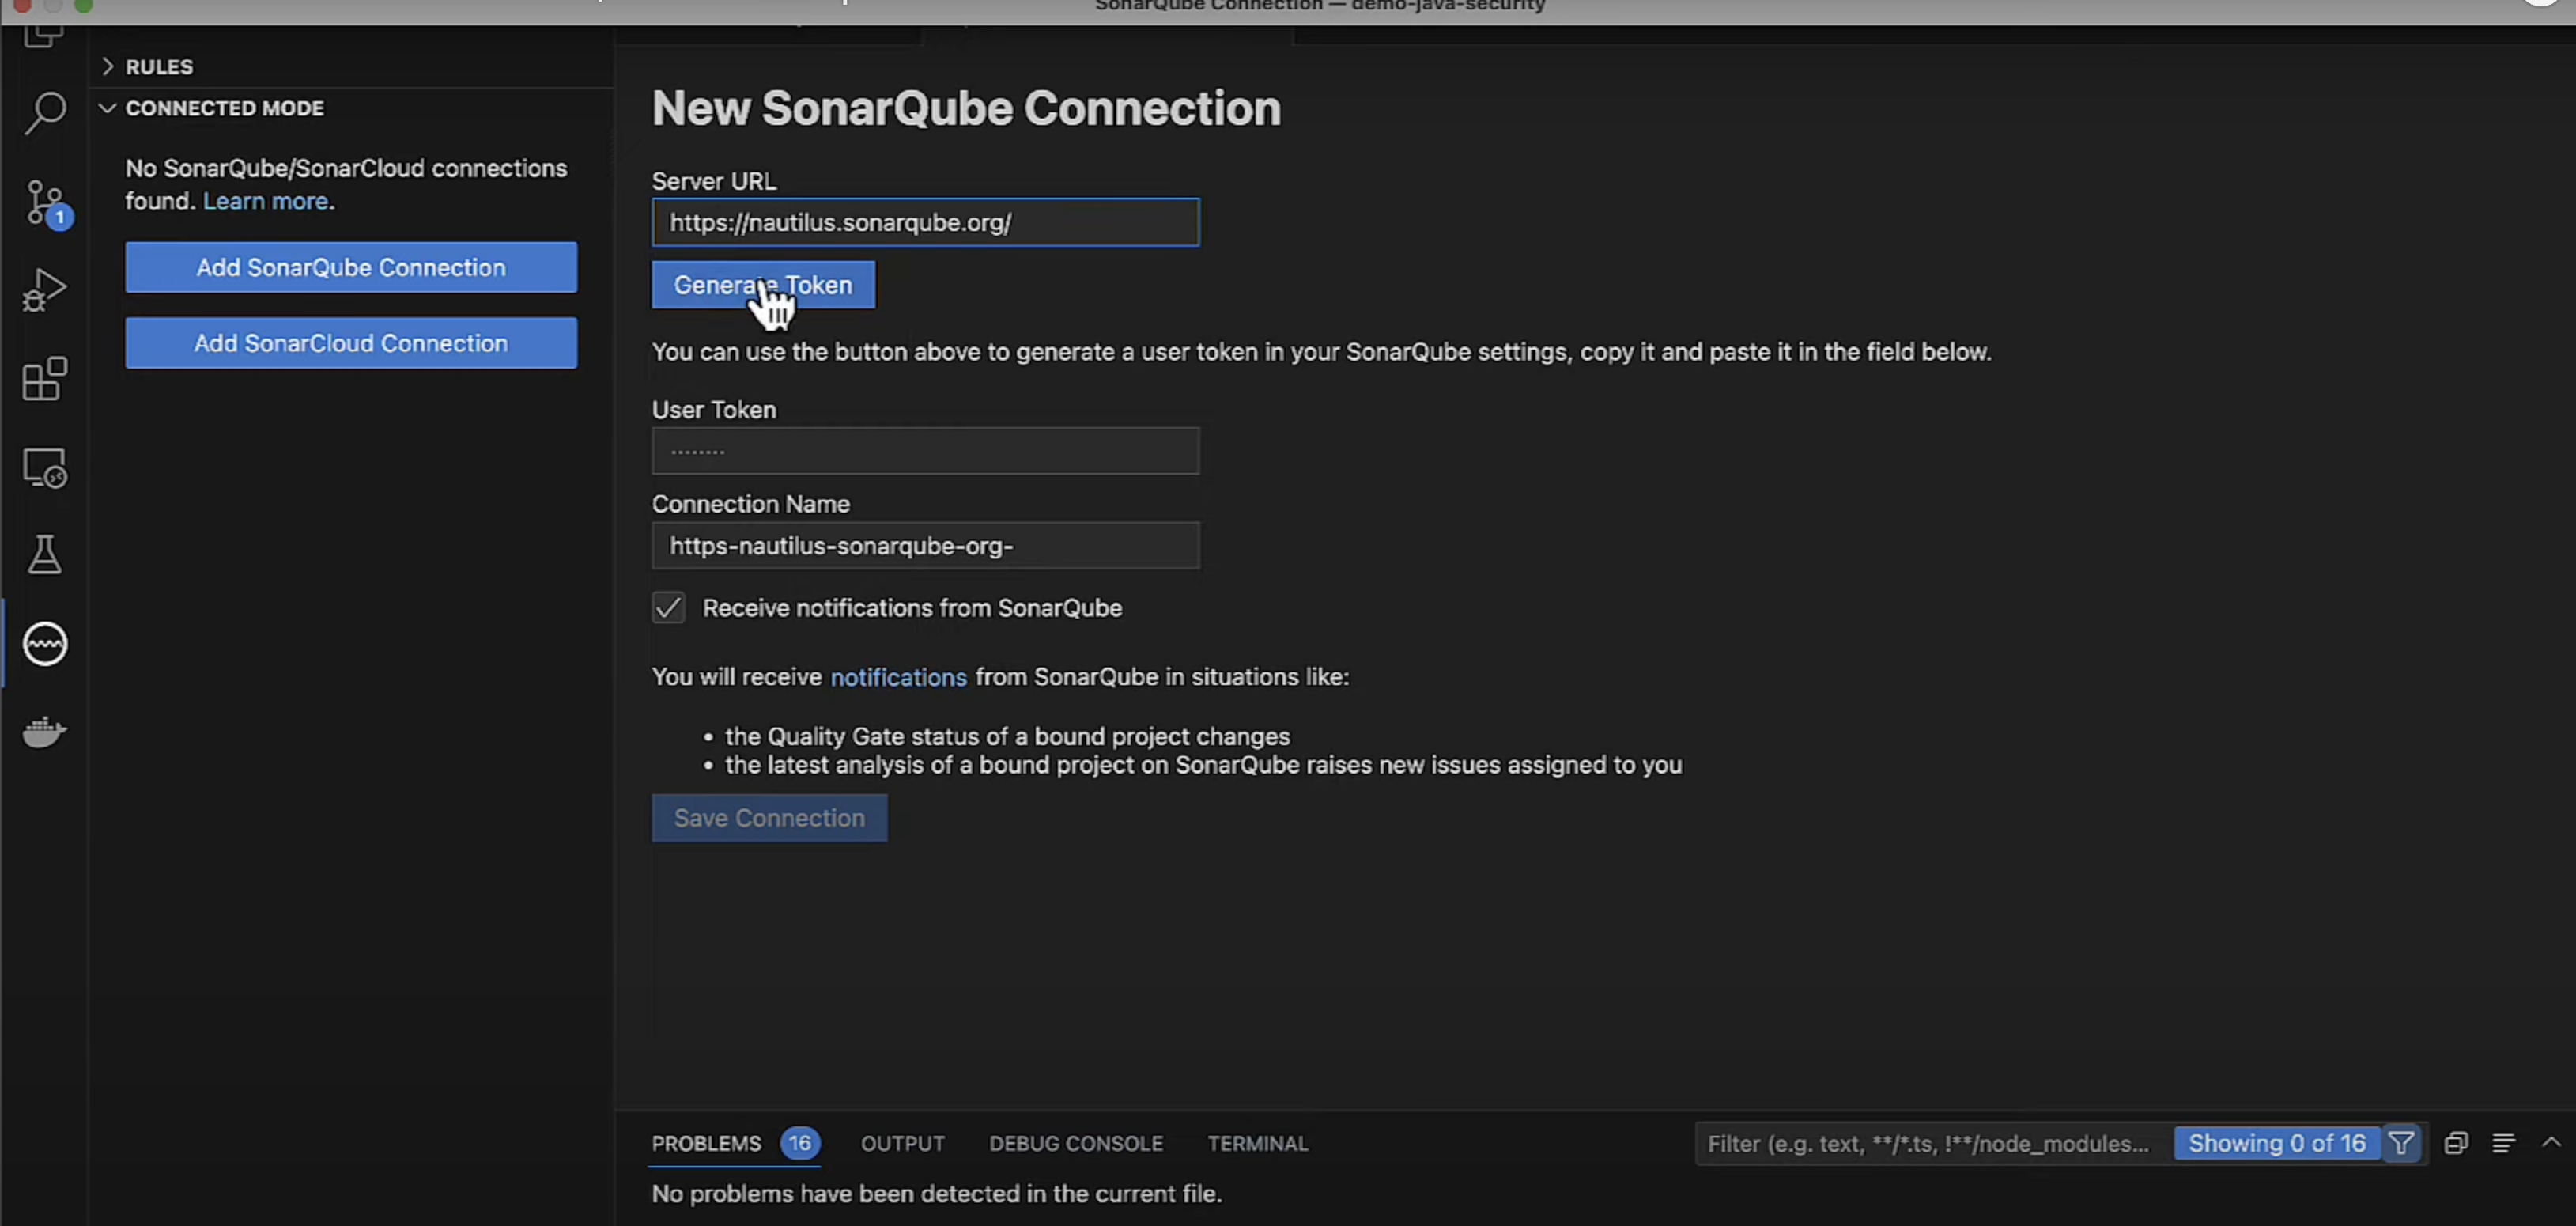 When connected to either SonarCloud or SonarQube the developer can leverage SonarLint to identify deeper issues.